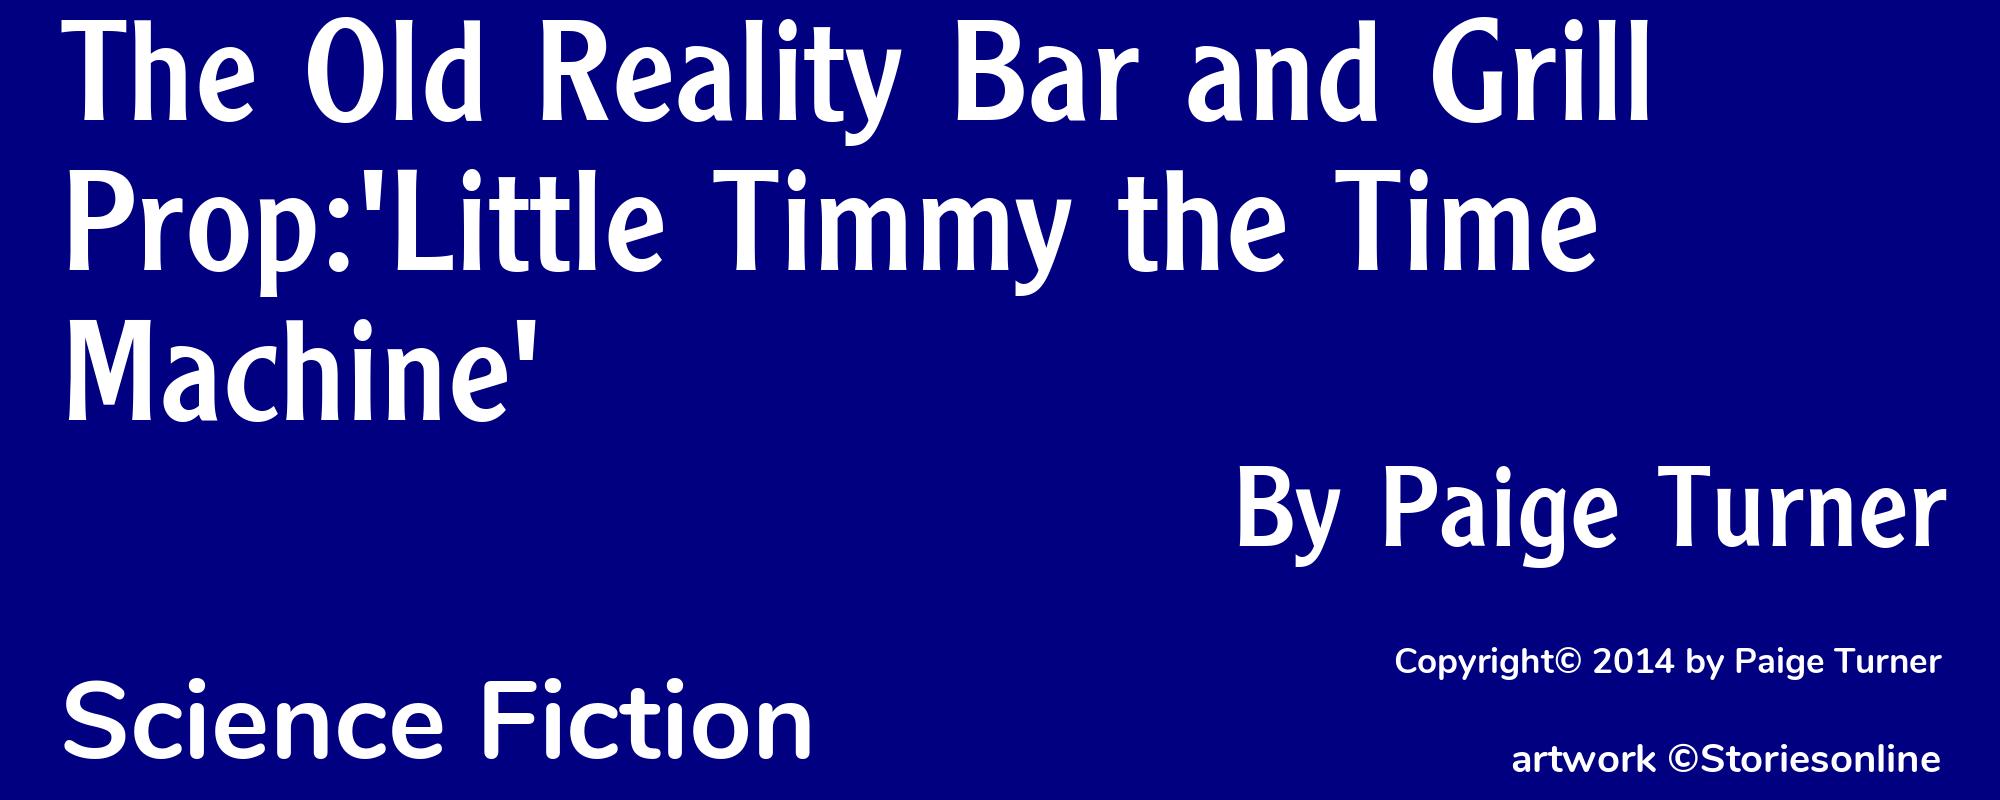 The Old Reality Bar and Grill Prop:'Little Timmy the Time Machine' - Cover